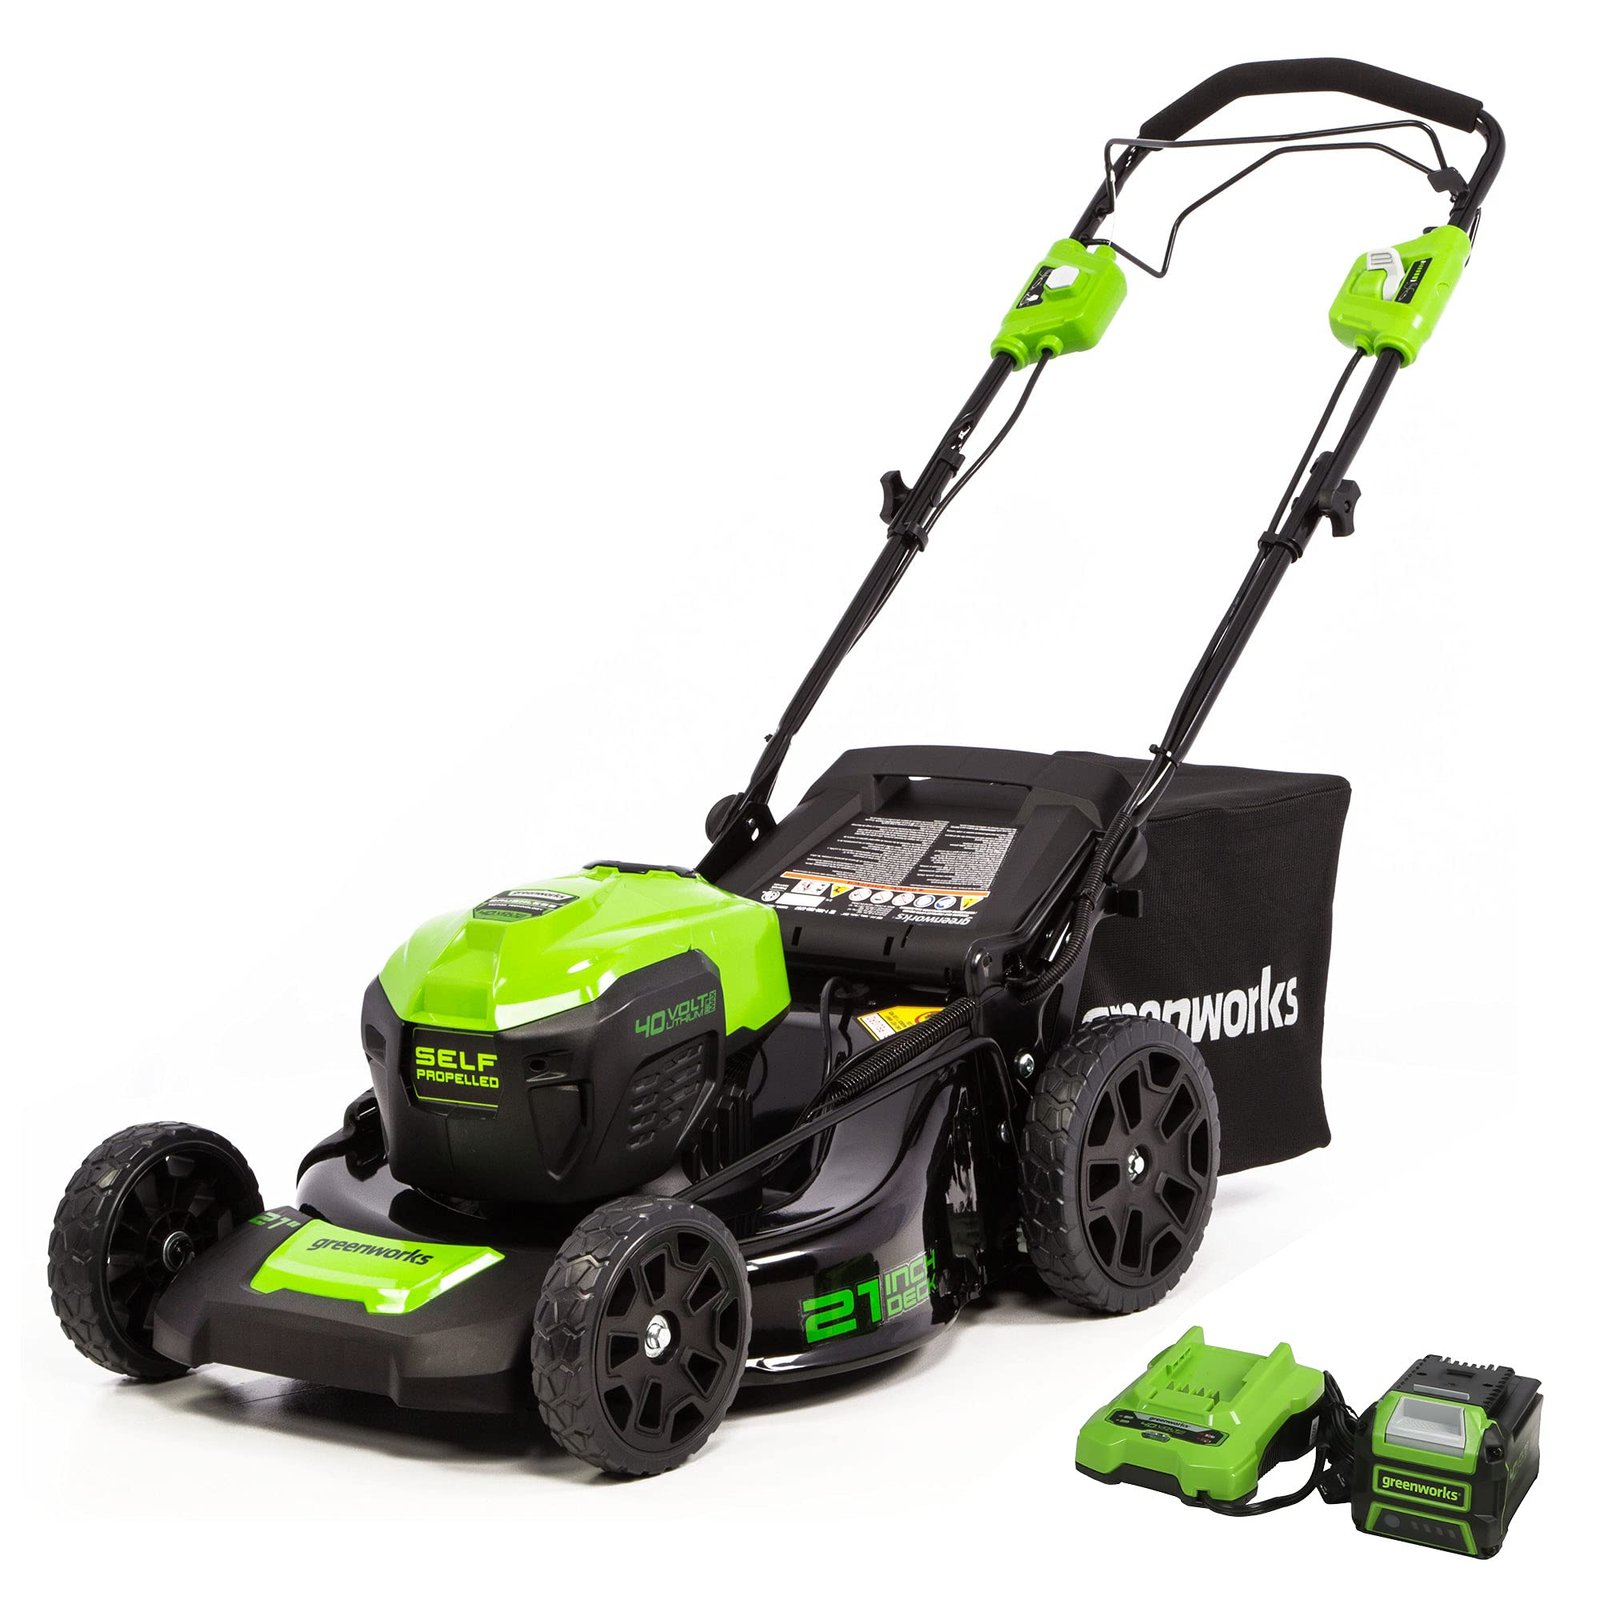 Greenworks 40V Lawn Mower Review